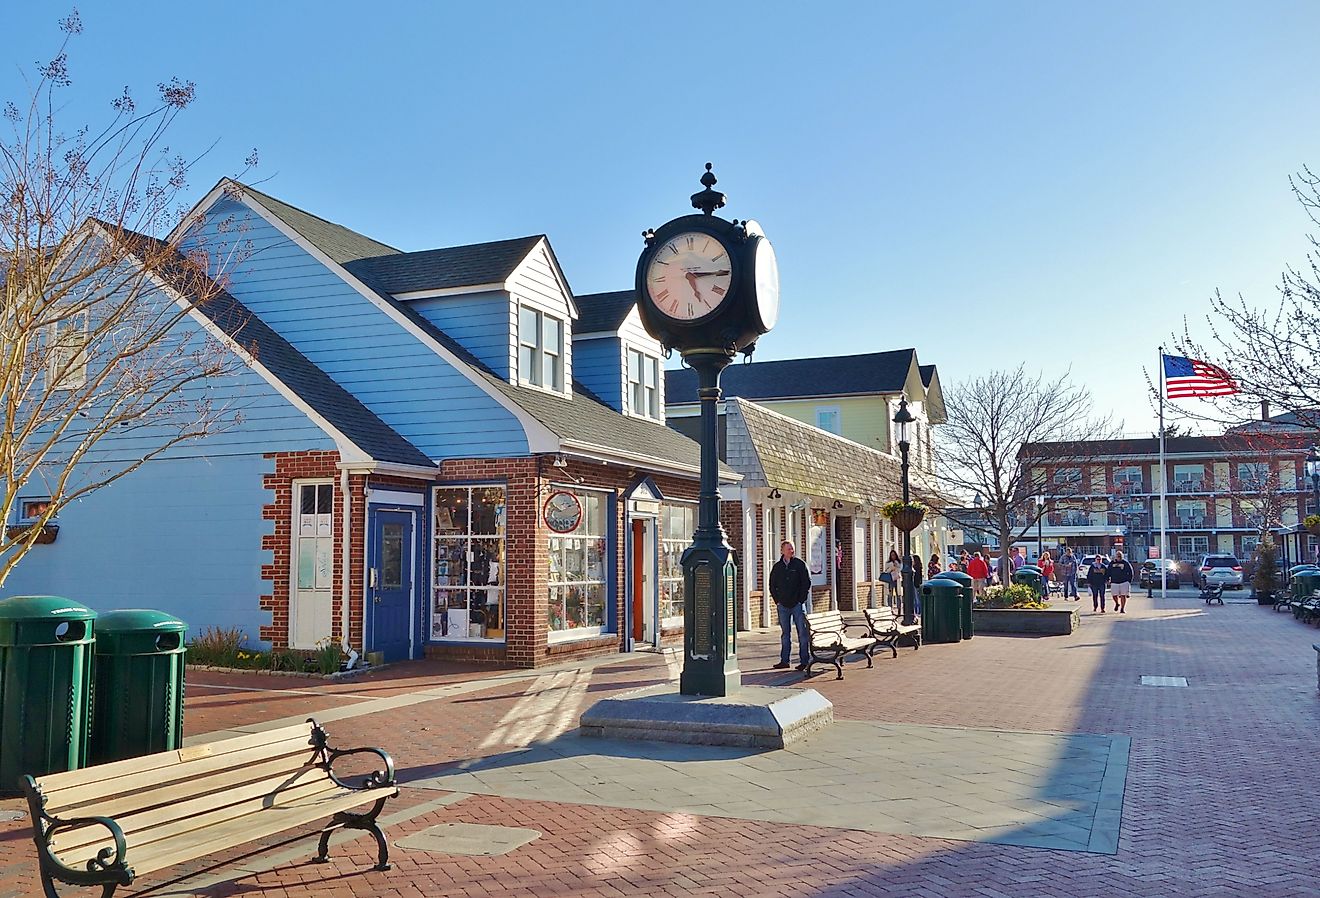 View of Washington Street Mall, a pedestrian shopping area in downtown Cape May, New Jersey. Image credit EQRoy via Shutterstock.com